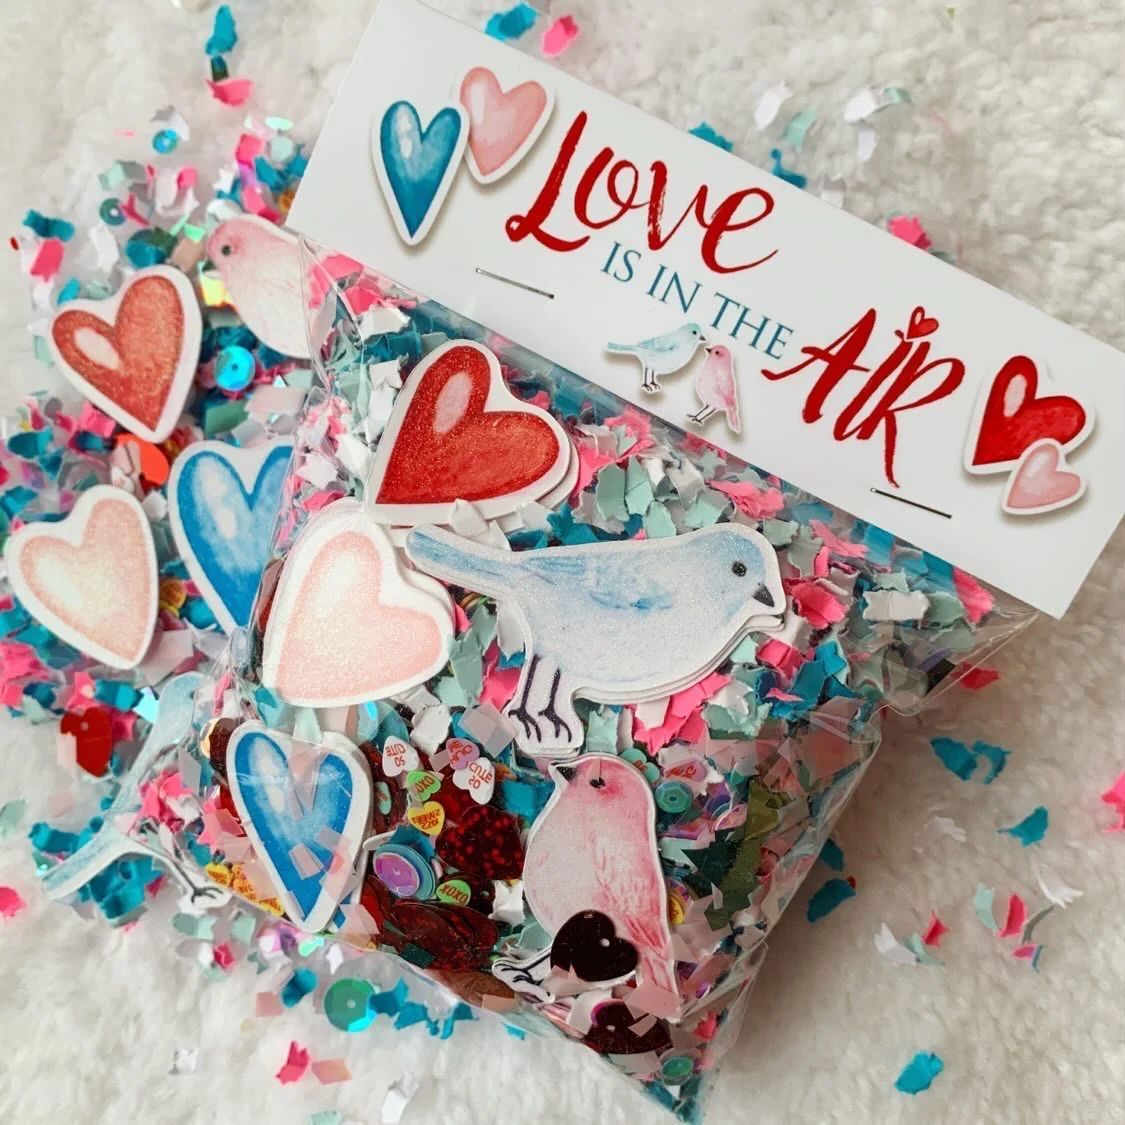 Love is in the Air Confetti Bag | Ellie and Piper